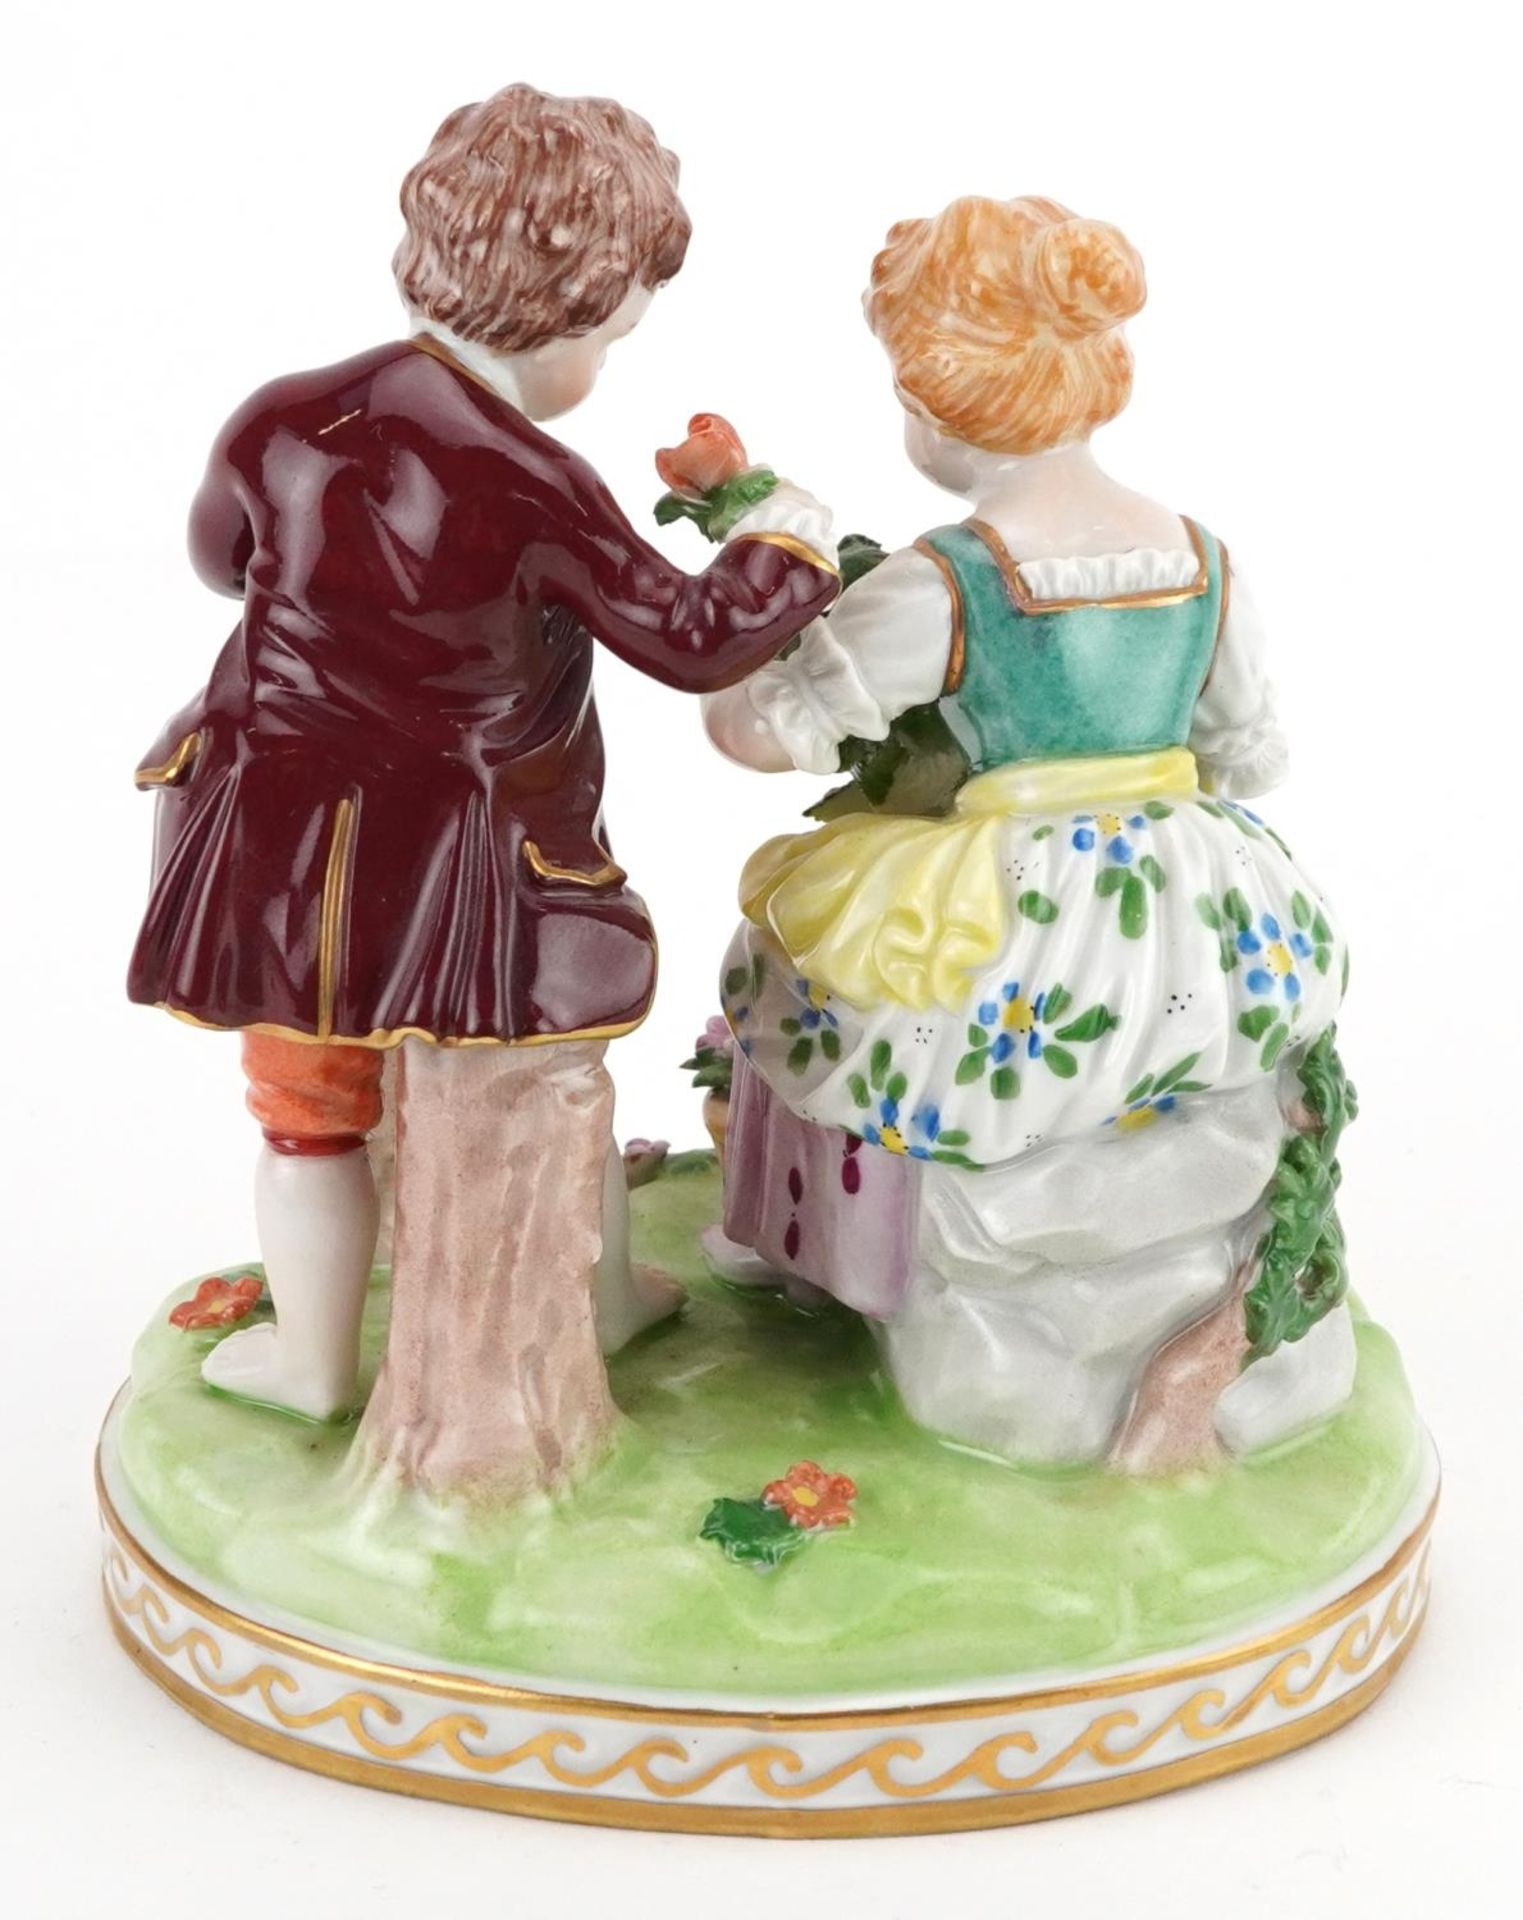 Dresden, German porcelain including a summer figure group of a young boy and girl holding flowers - Image 5 of 6